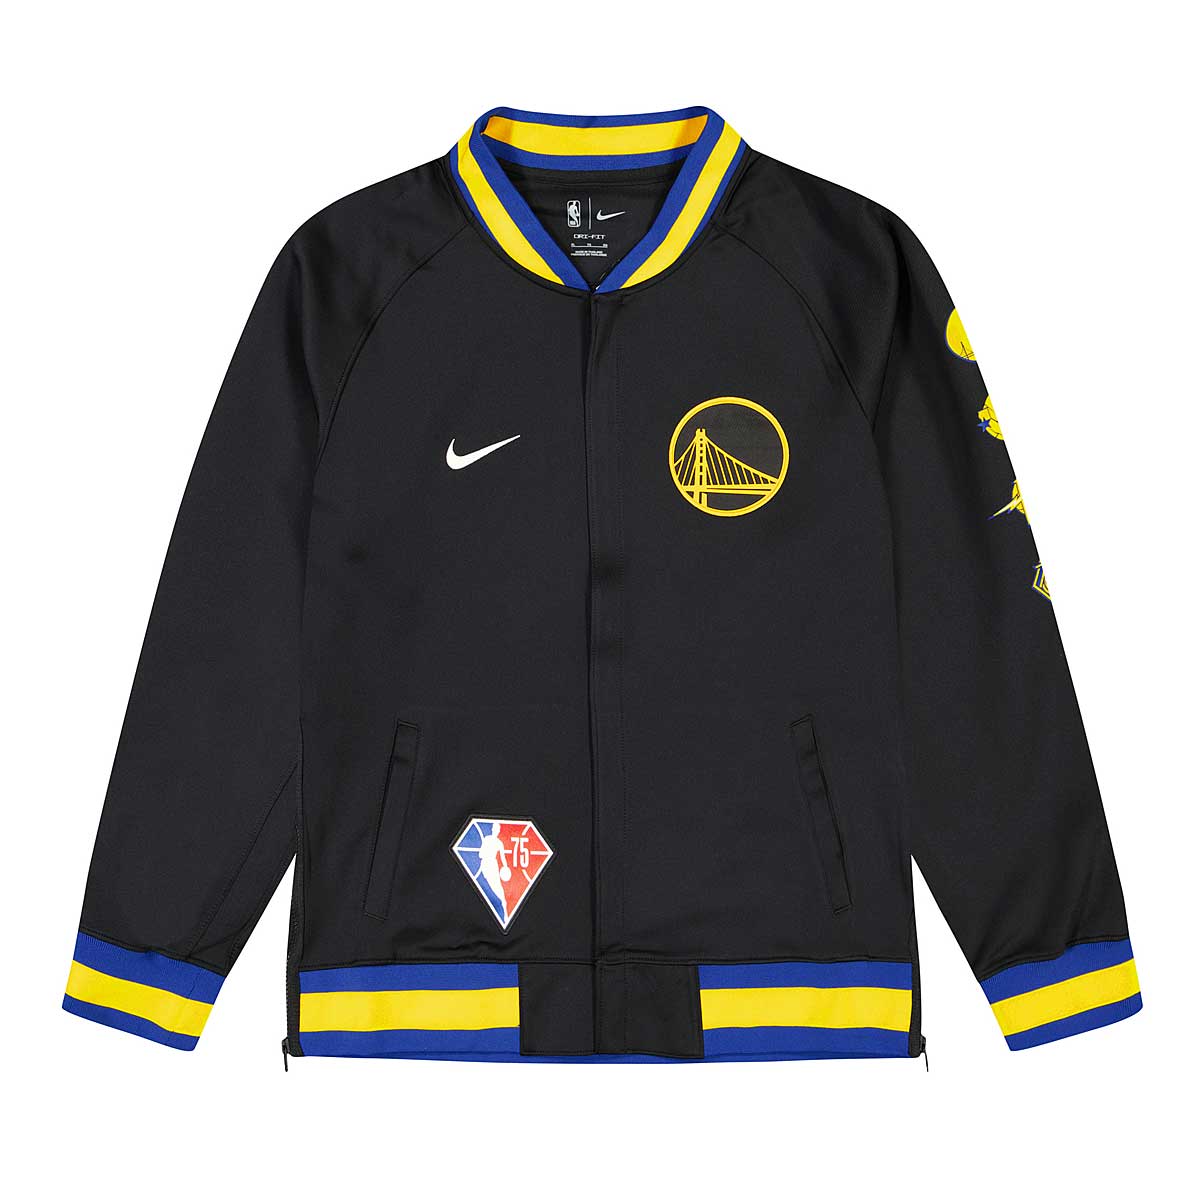 Buy NBA GOLDEN STATE WARRIORS SHOWTIME MMT JACKET for N/A 0.0 on !